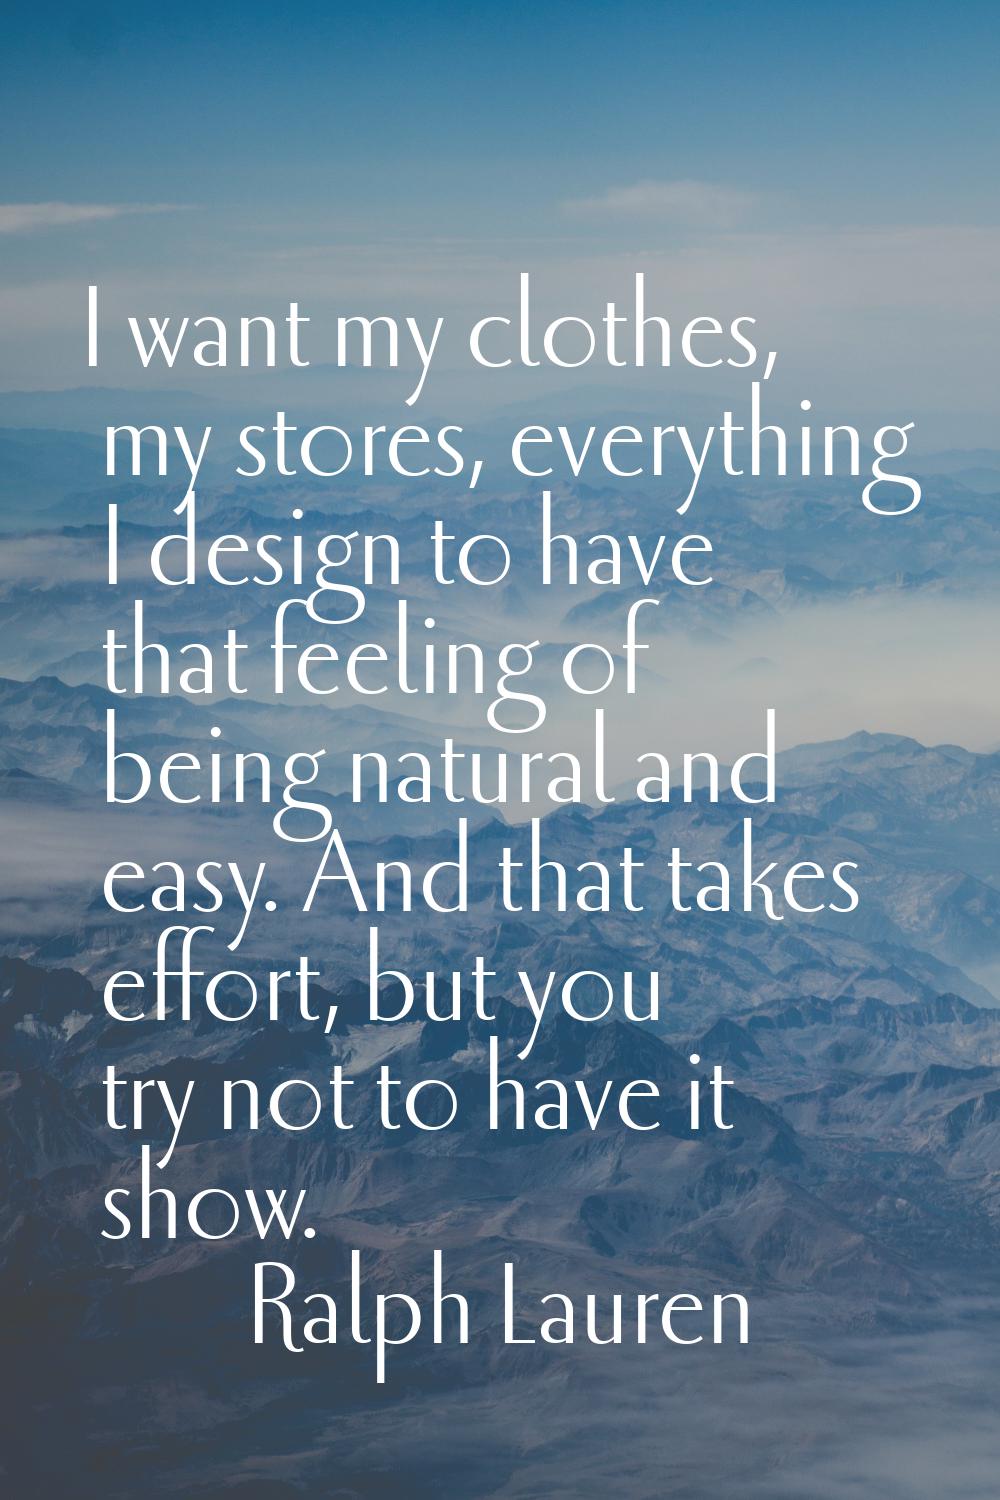 I want my clothes, my stores, everything I design to have that feeling of being natural and easy. A